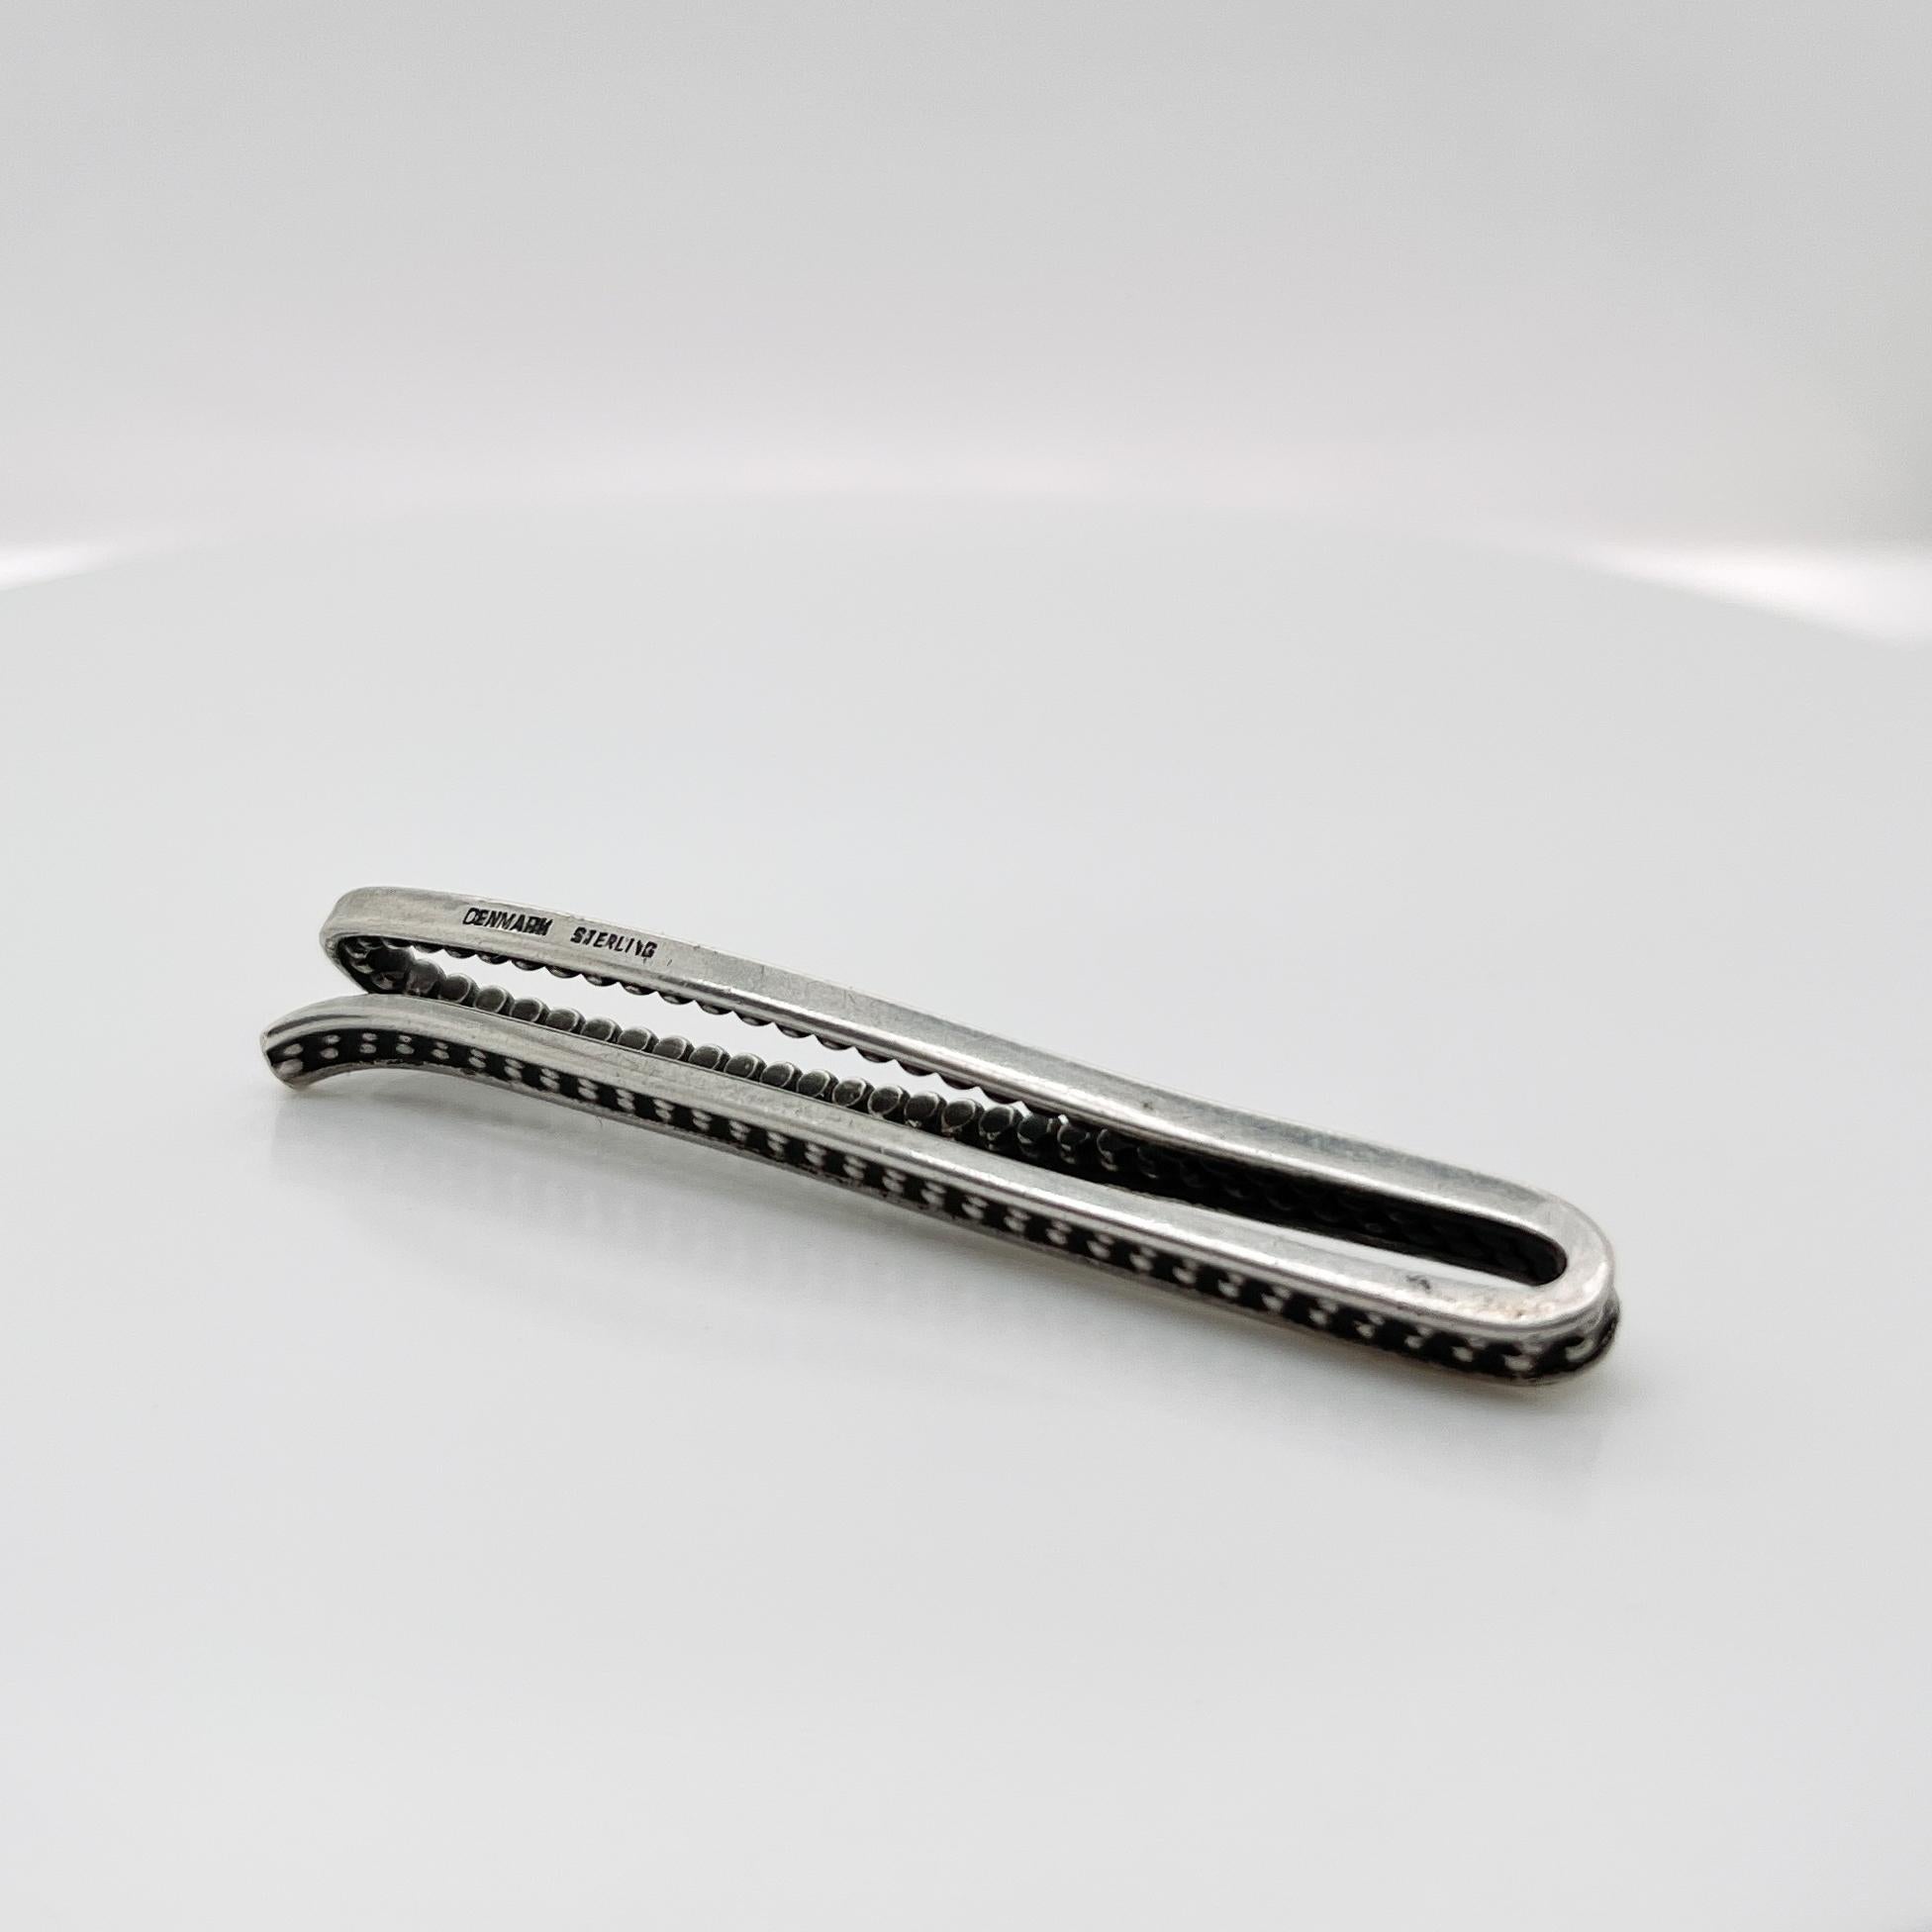 Georg Jensen Sterling Silver Tie Bar or Money Clip Model No. 60 In Good Condition For Sale In Philadelphia, PA